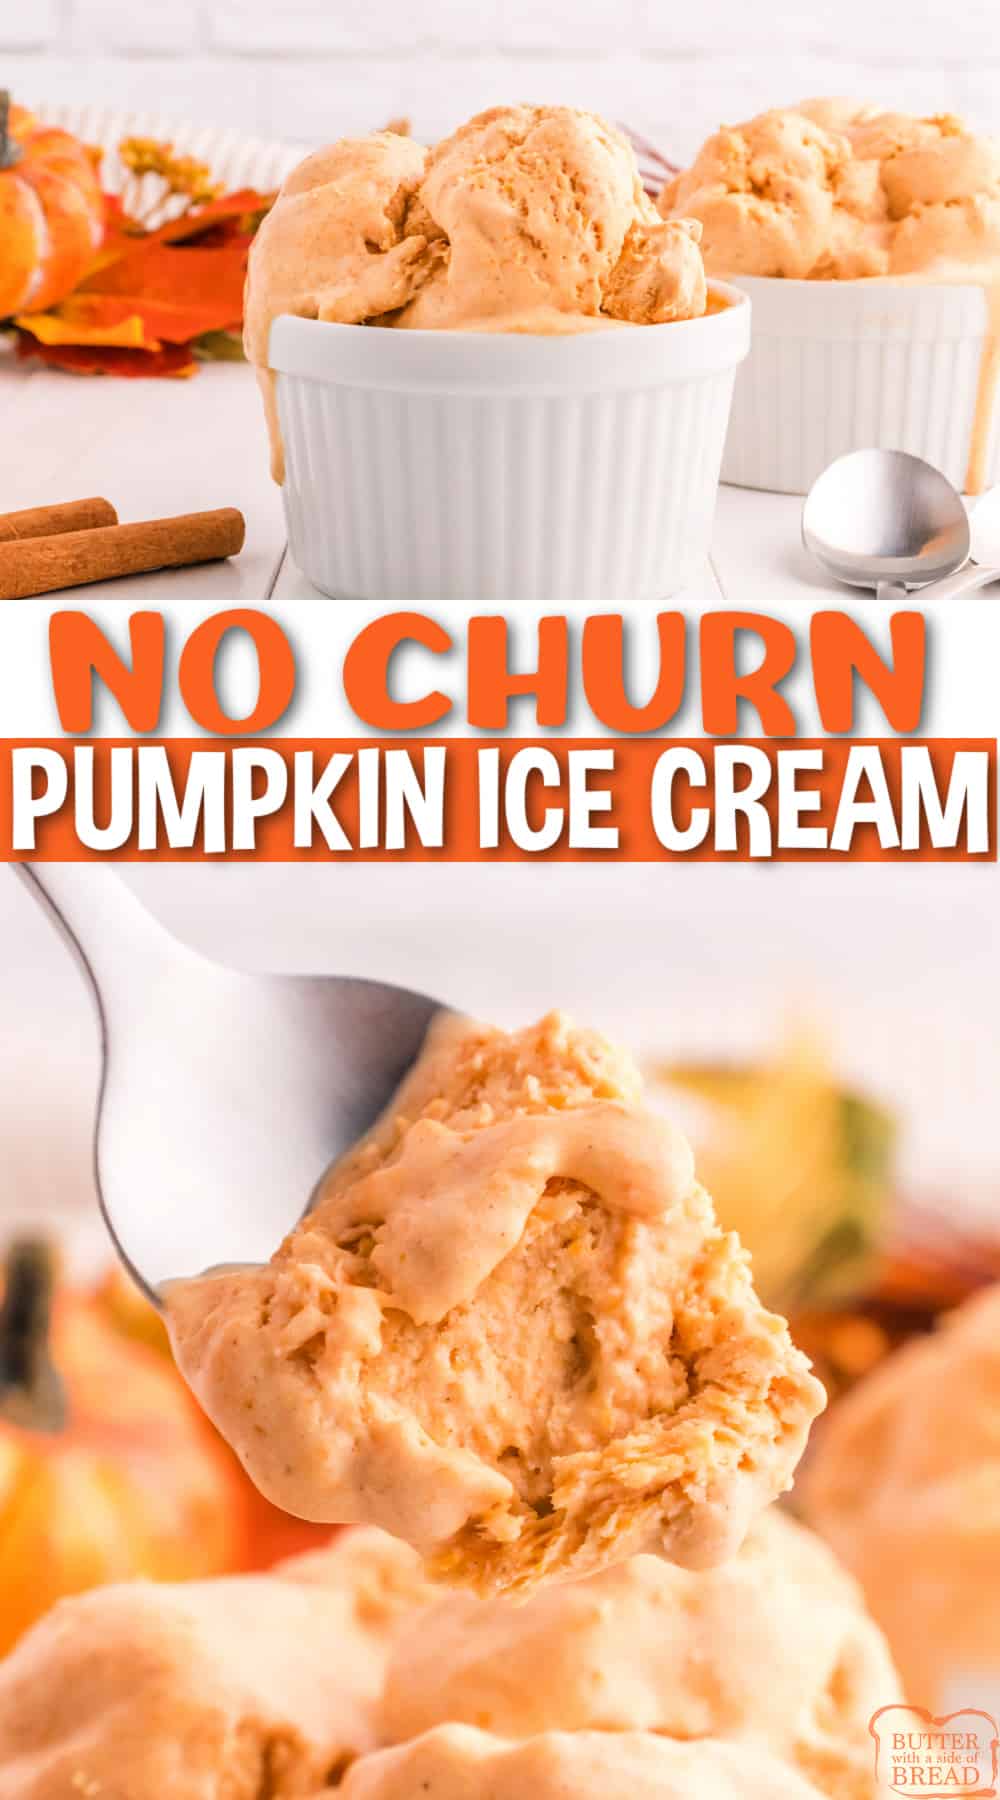 No Churn Pumpkin Ice Cream is made with canned pumpkin puree, maple syrup, pumpkin pie spice, and vanilla extract. Perfect ice cream recipe for fall - no ice cream maker needed!